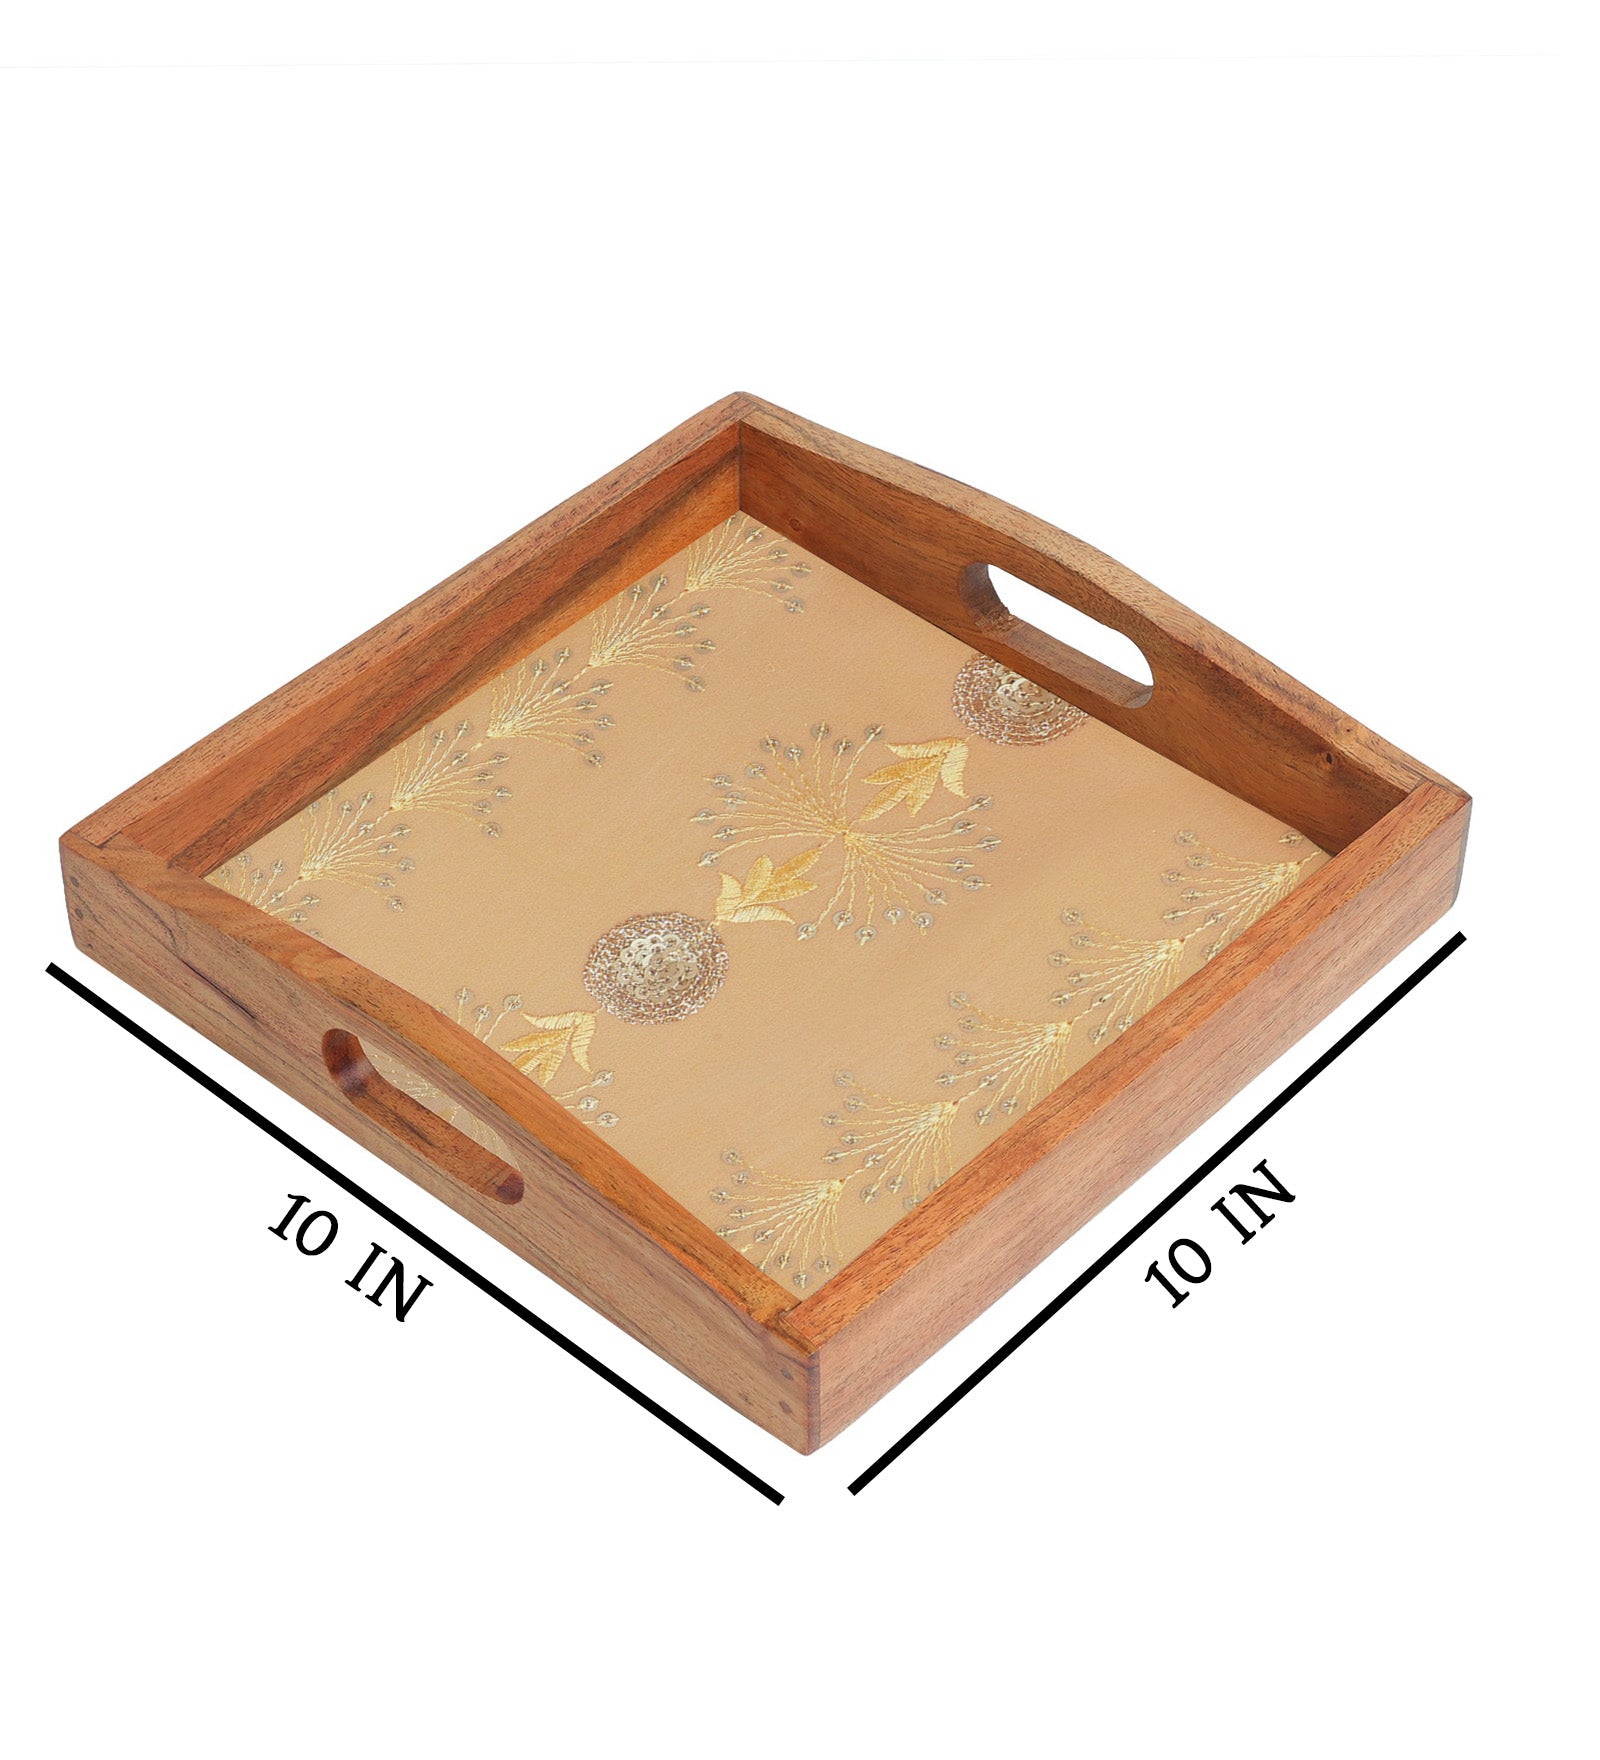 exquisite wooden serving tray 10"X 10"